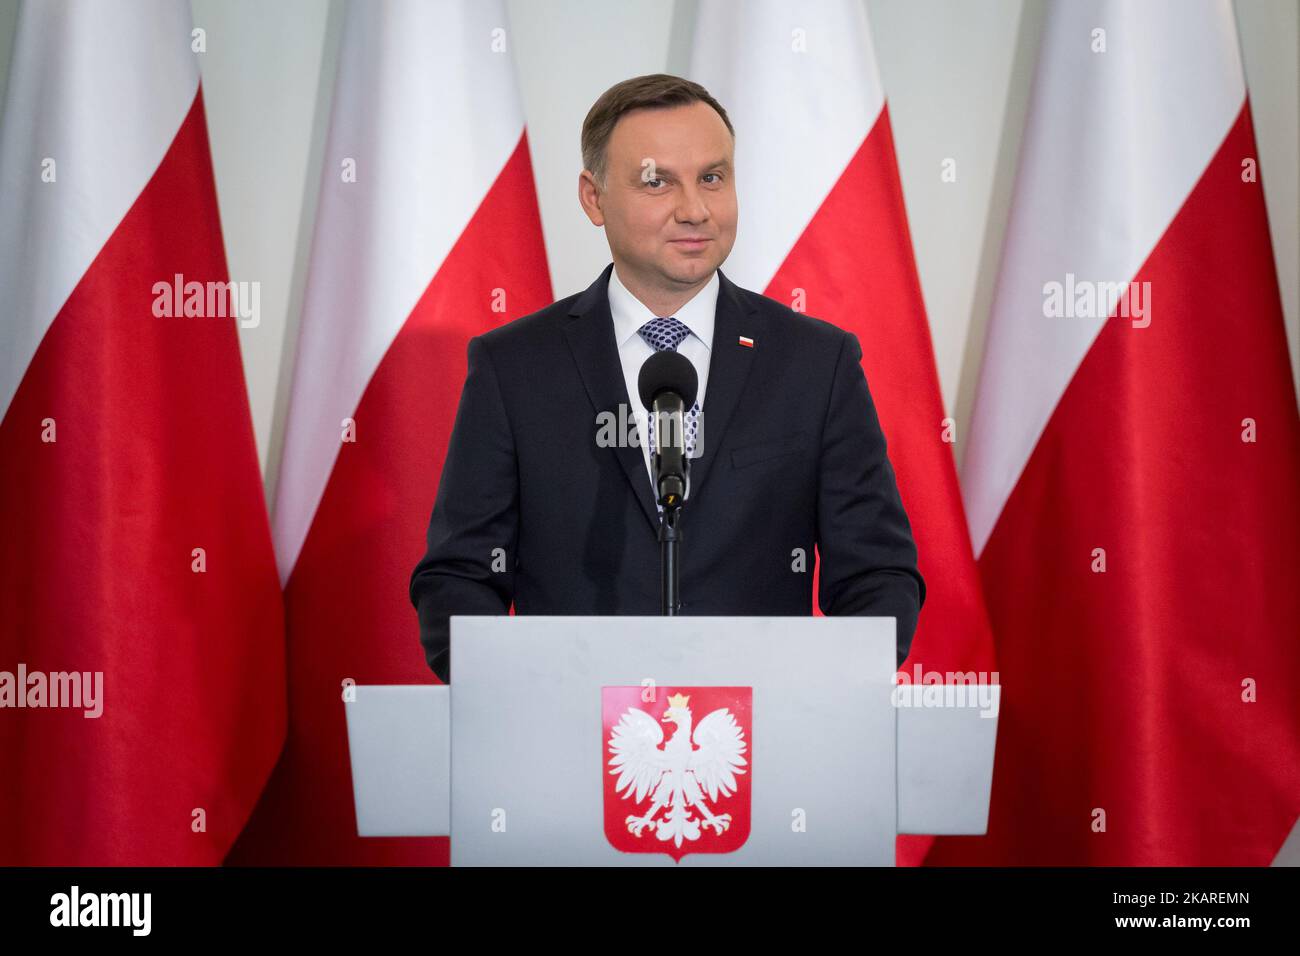 President of Poland Andrzej Duda speaks during the press conference about Polish judicary system reforms at Presidential Palace in Warsaw, Poland on 25 September 2017. President Duda presented his draft legislation to reform the Supreme Court (SN) and the National Council of Judiciary (KRS). In July 2017, Duda vetoed Supreme Court and National Judiciary Council bills voted by the Polish Sejm's majority. Large protests have been held across Poland over rules passed 20 July by the ruling party that would limit the independence of the judiciary. (Photo by Mateusz Wlodarczyk/NurPhoto) Stock Photo